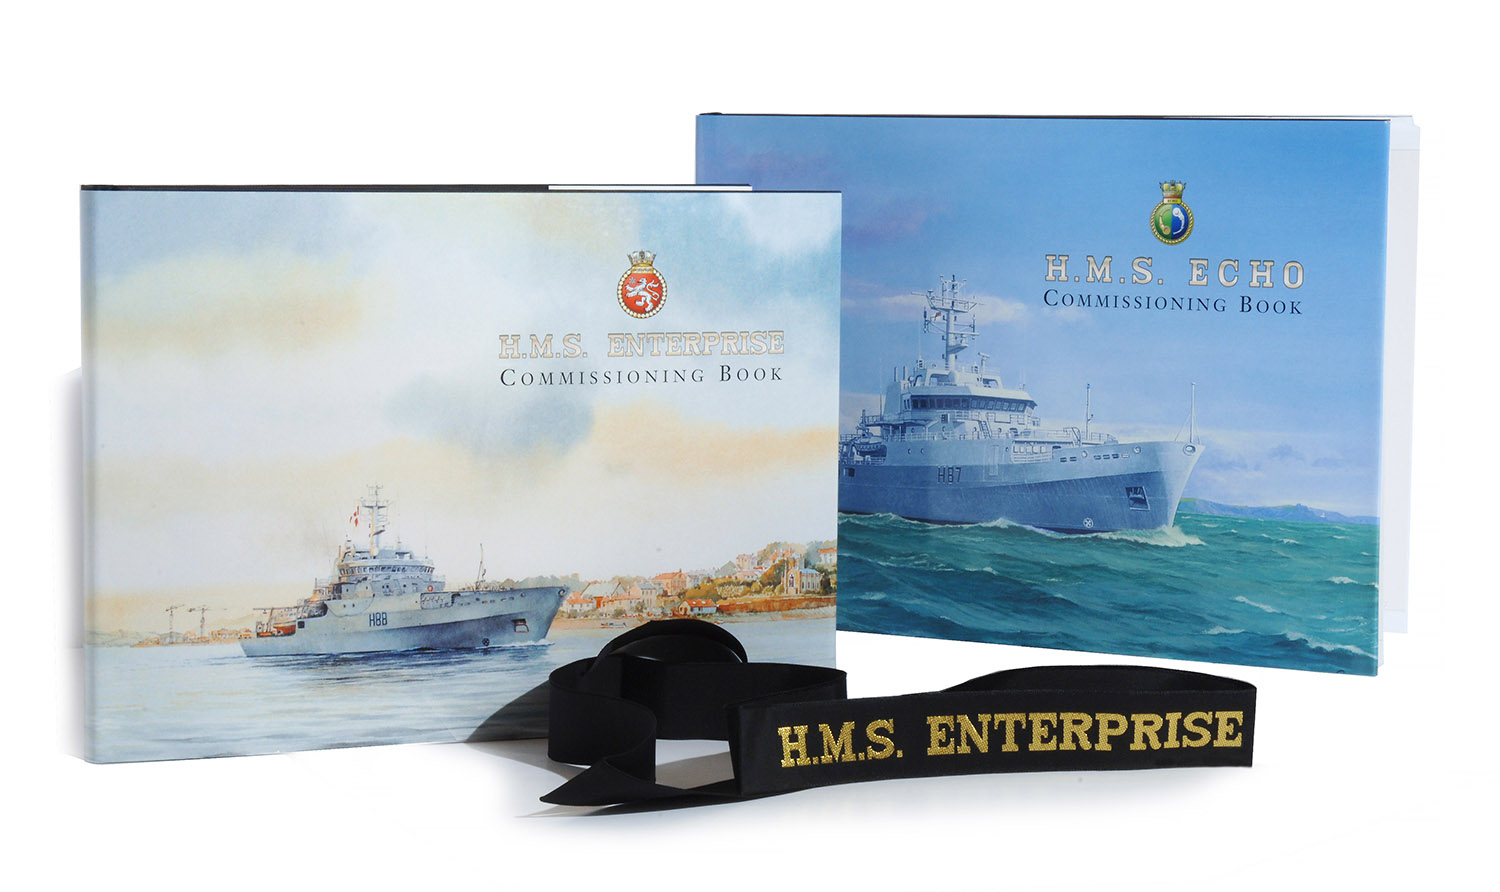 image of the covers of two Commissioning Books for Royal Navy ships HMS Echo and HMS Enterprise